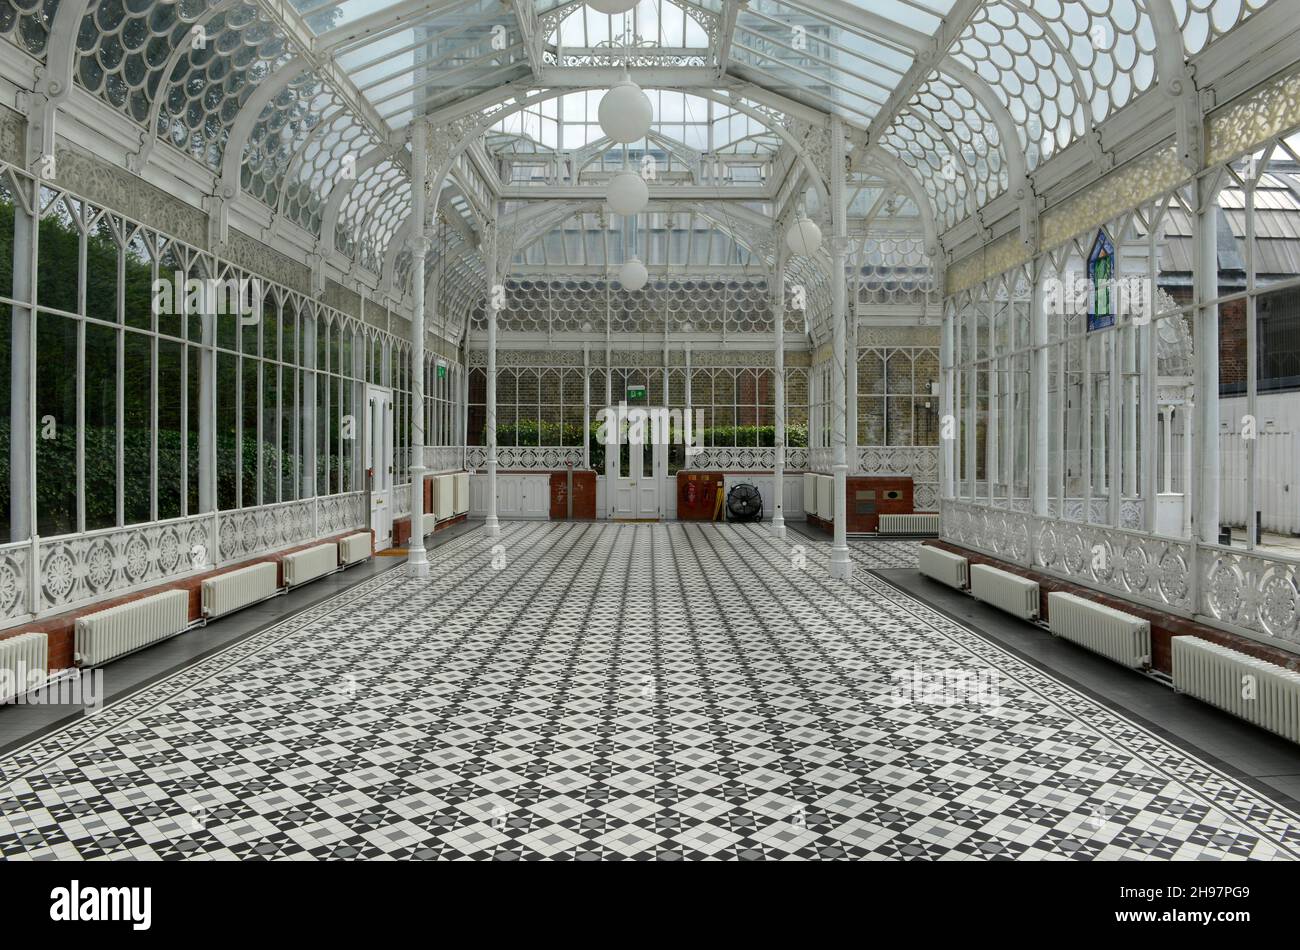 The conservatory at the Horniman Museum and Gardens in London, UK, was used as a teahouse until Covid, now stands empty awaiting re-use. Stock Photo